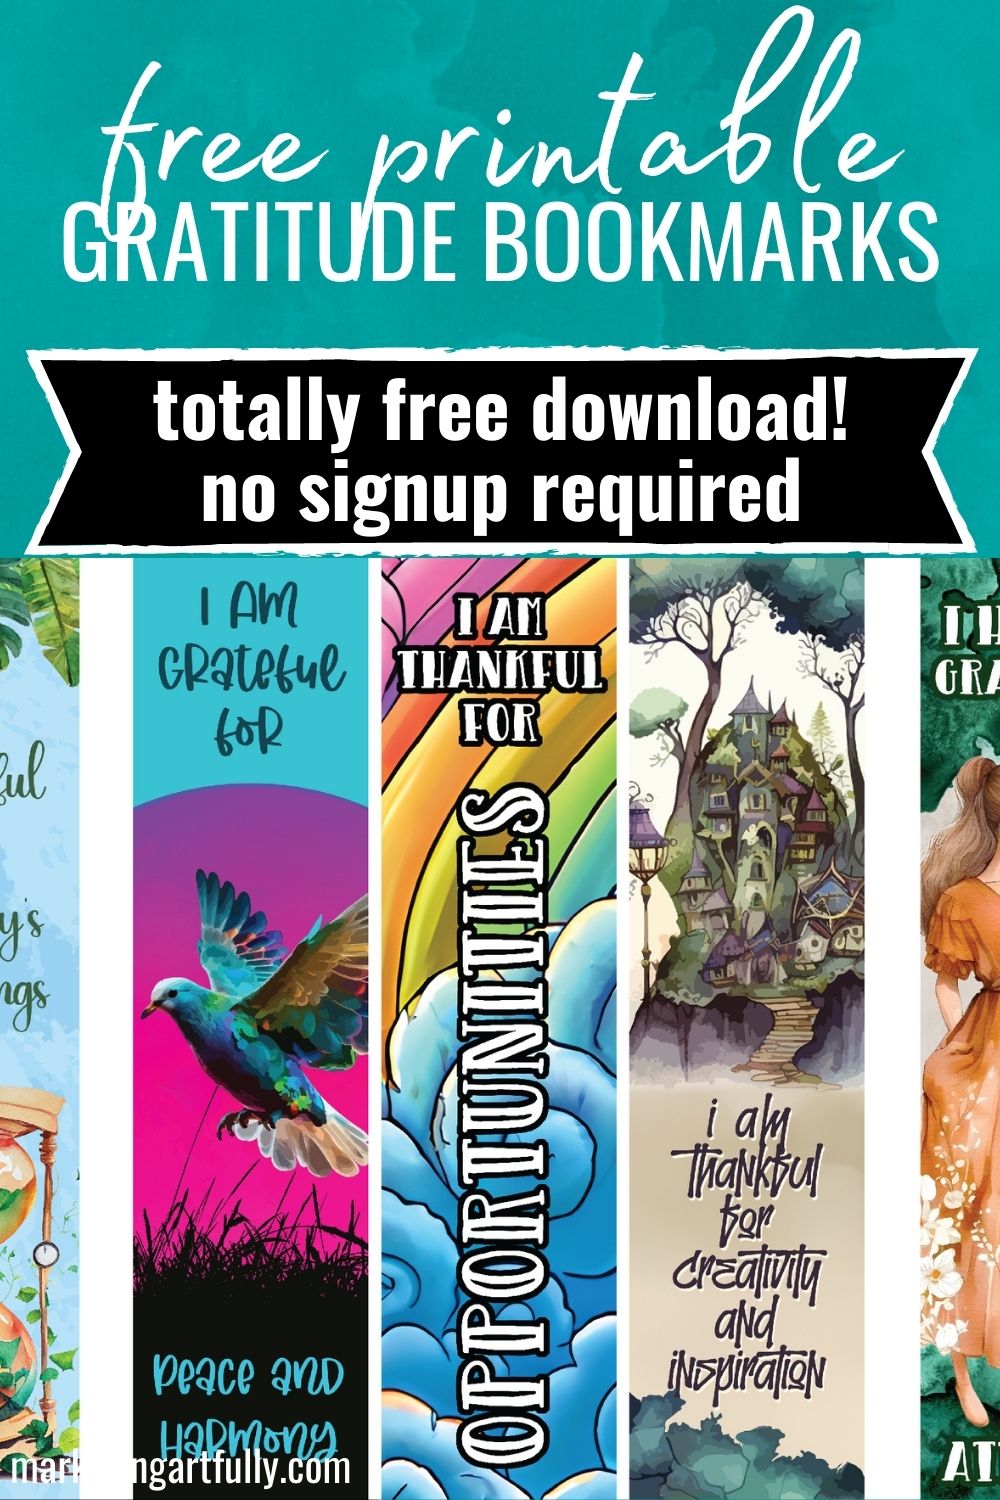 Bring Positivity to Every Book: Free Printable Bookmarks Packed with Positive Quotes